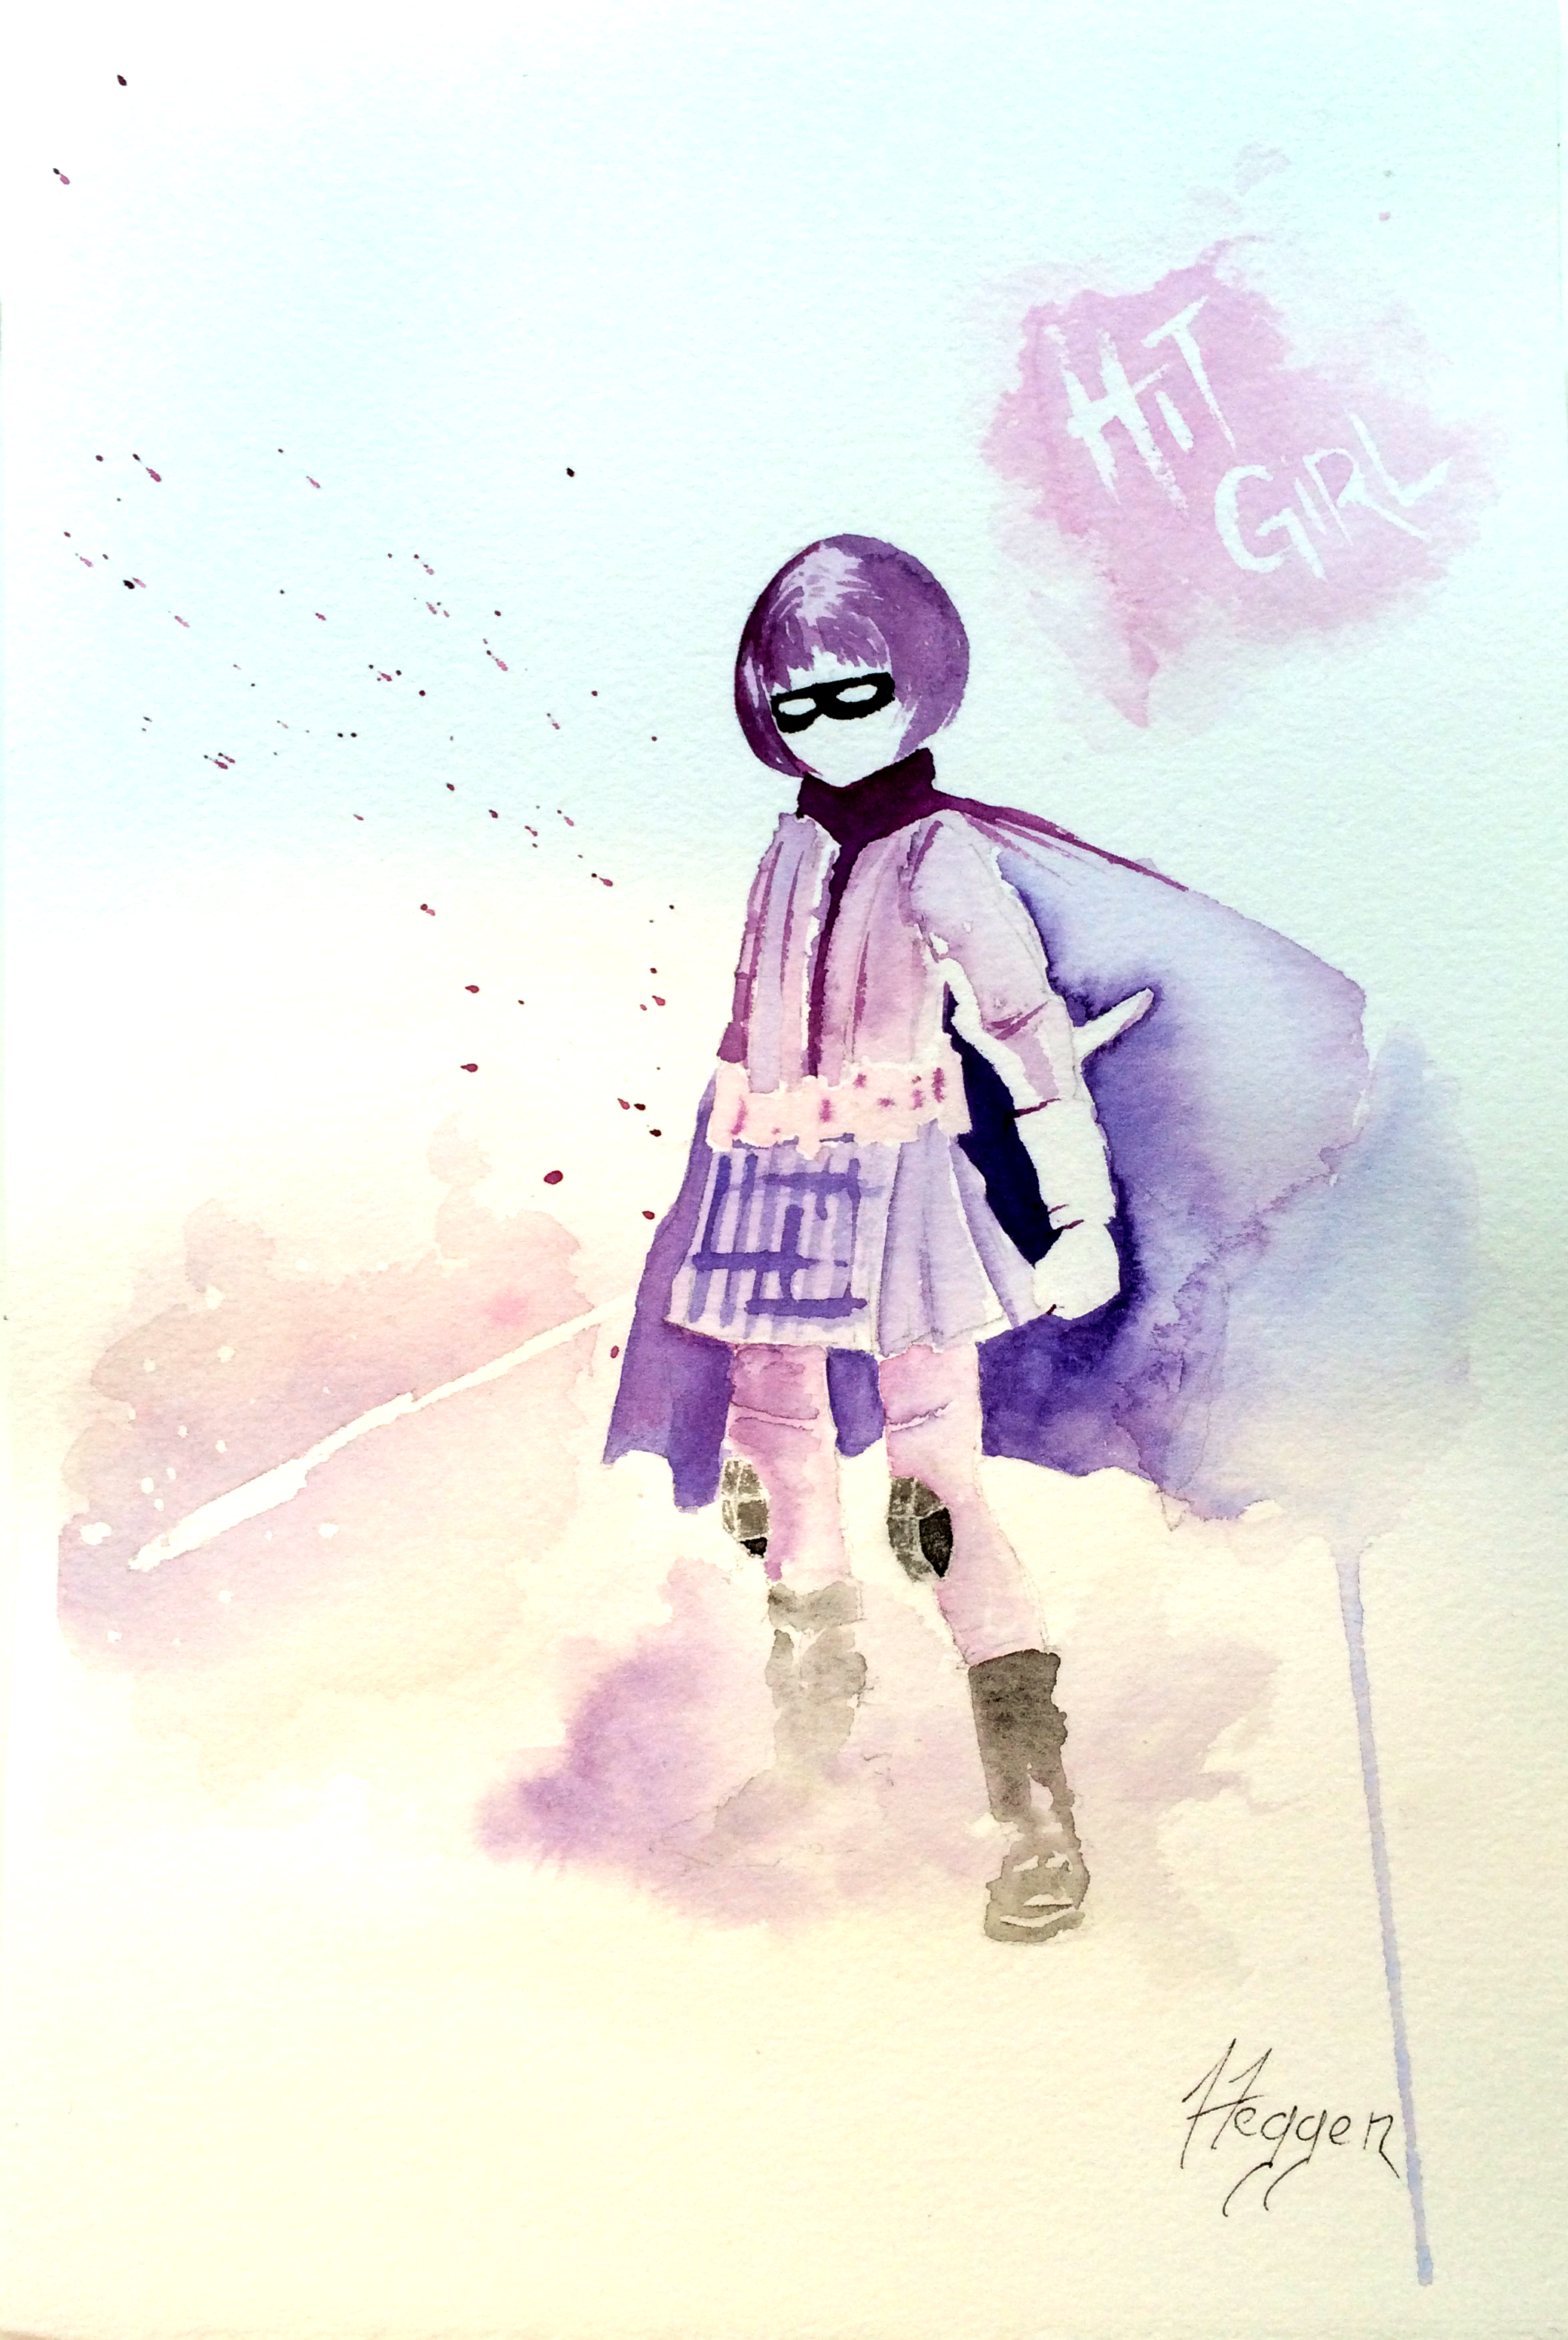 Hit-Girl greets you.